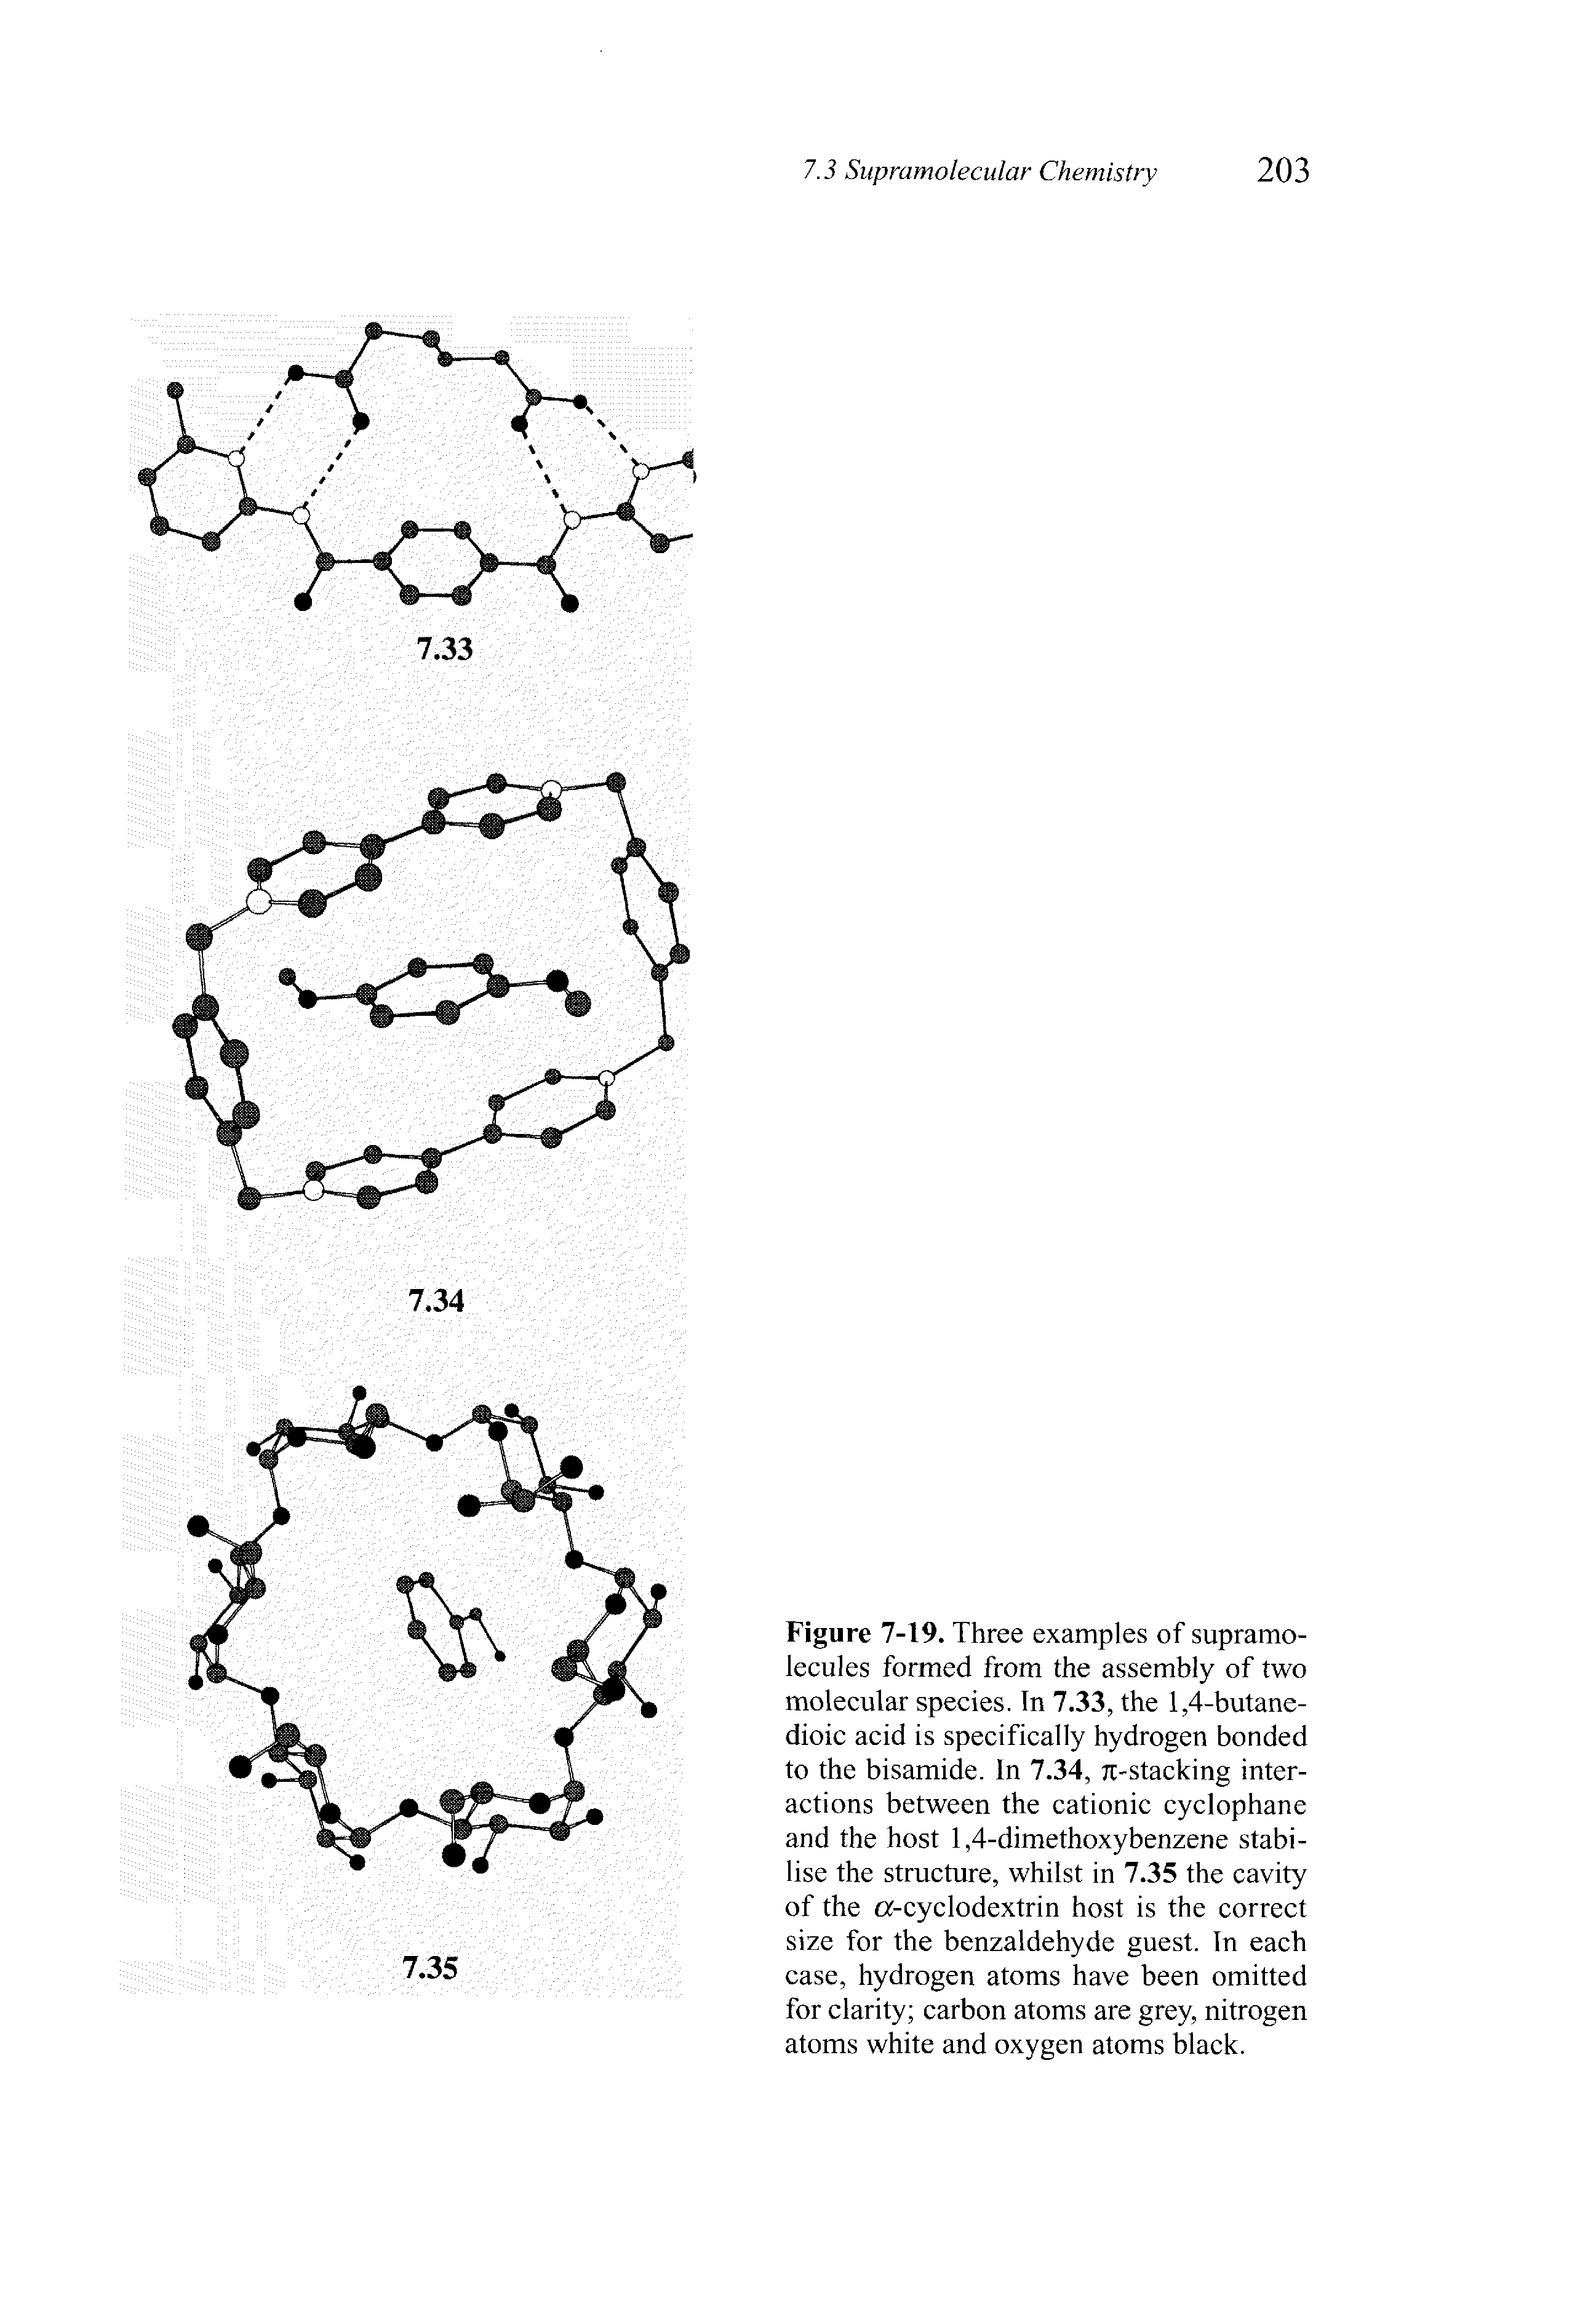 Figure 7-19. Three examples of supramo-lecules formed from the assembly of two molecular species. In 7.33, the 1,4-butane-dioic acid is specifically hydrogen bonded to the bisamide. In 7.34, rc-stacking interactions between the cationic cyclophane and the host 1,4-dimethoxybenzene stabilise the structure, whilst in 7.35 the cavity of the ct-cyclodextrin host is the correct size for the benzaldehyde guest. In each case, hydrogen atoms have been omitted for clarity carbon atoms are grey, nitrogen atoms white and oxygen atoms black.